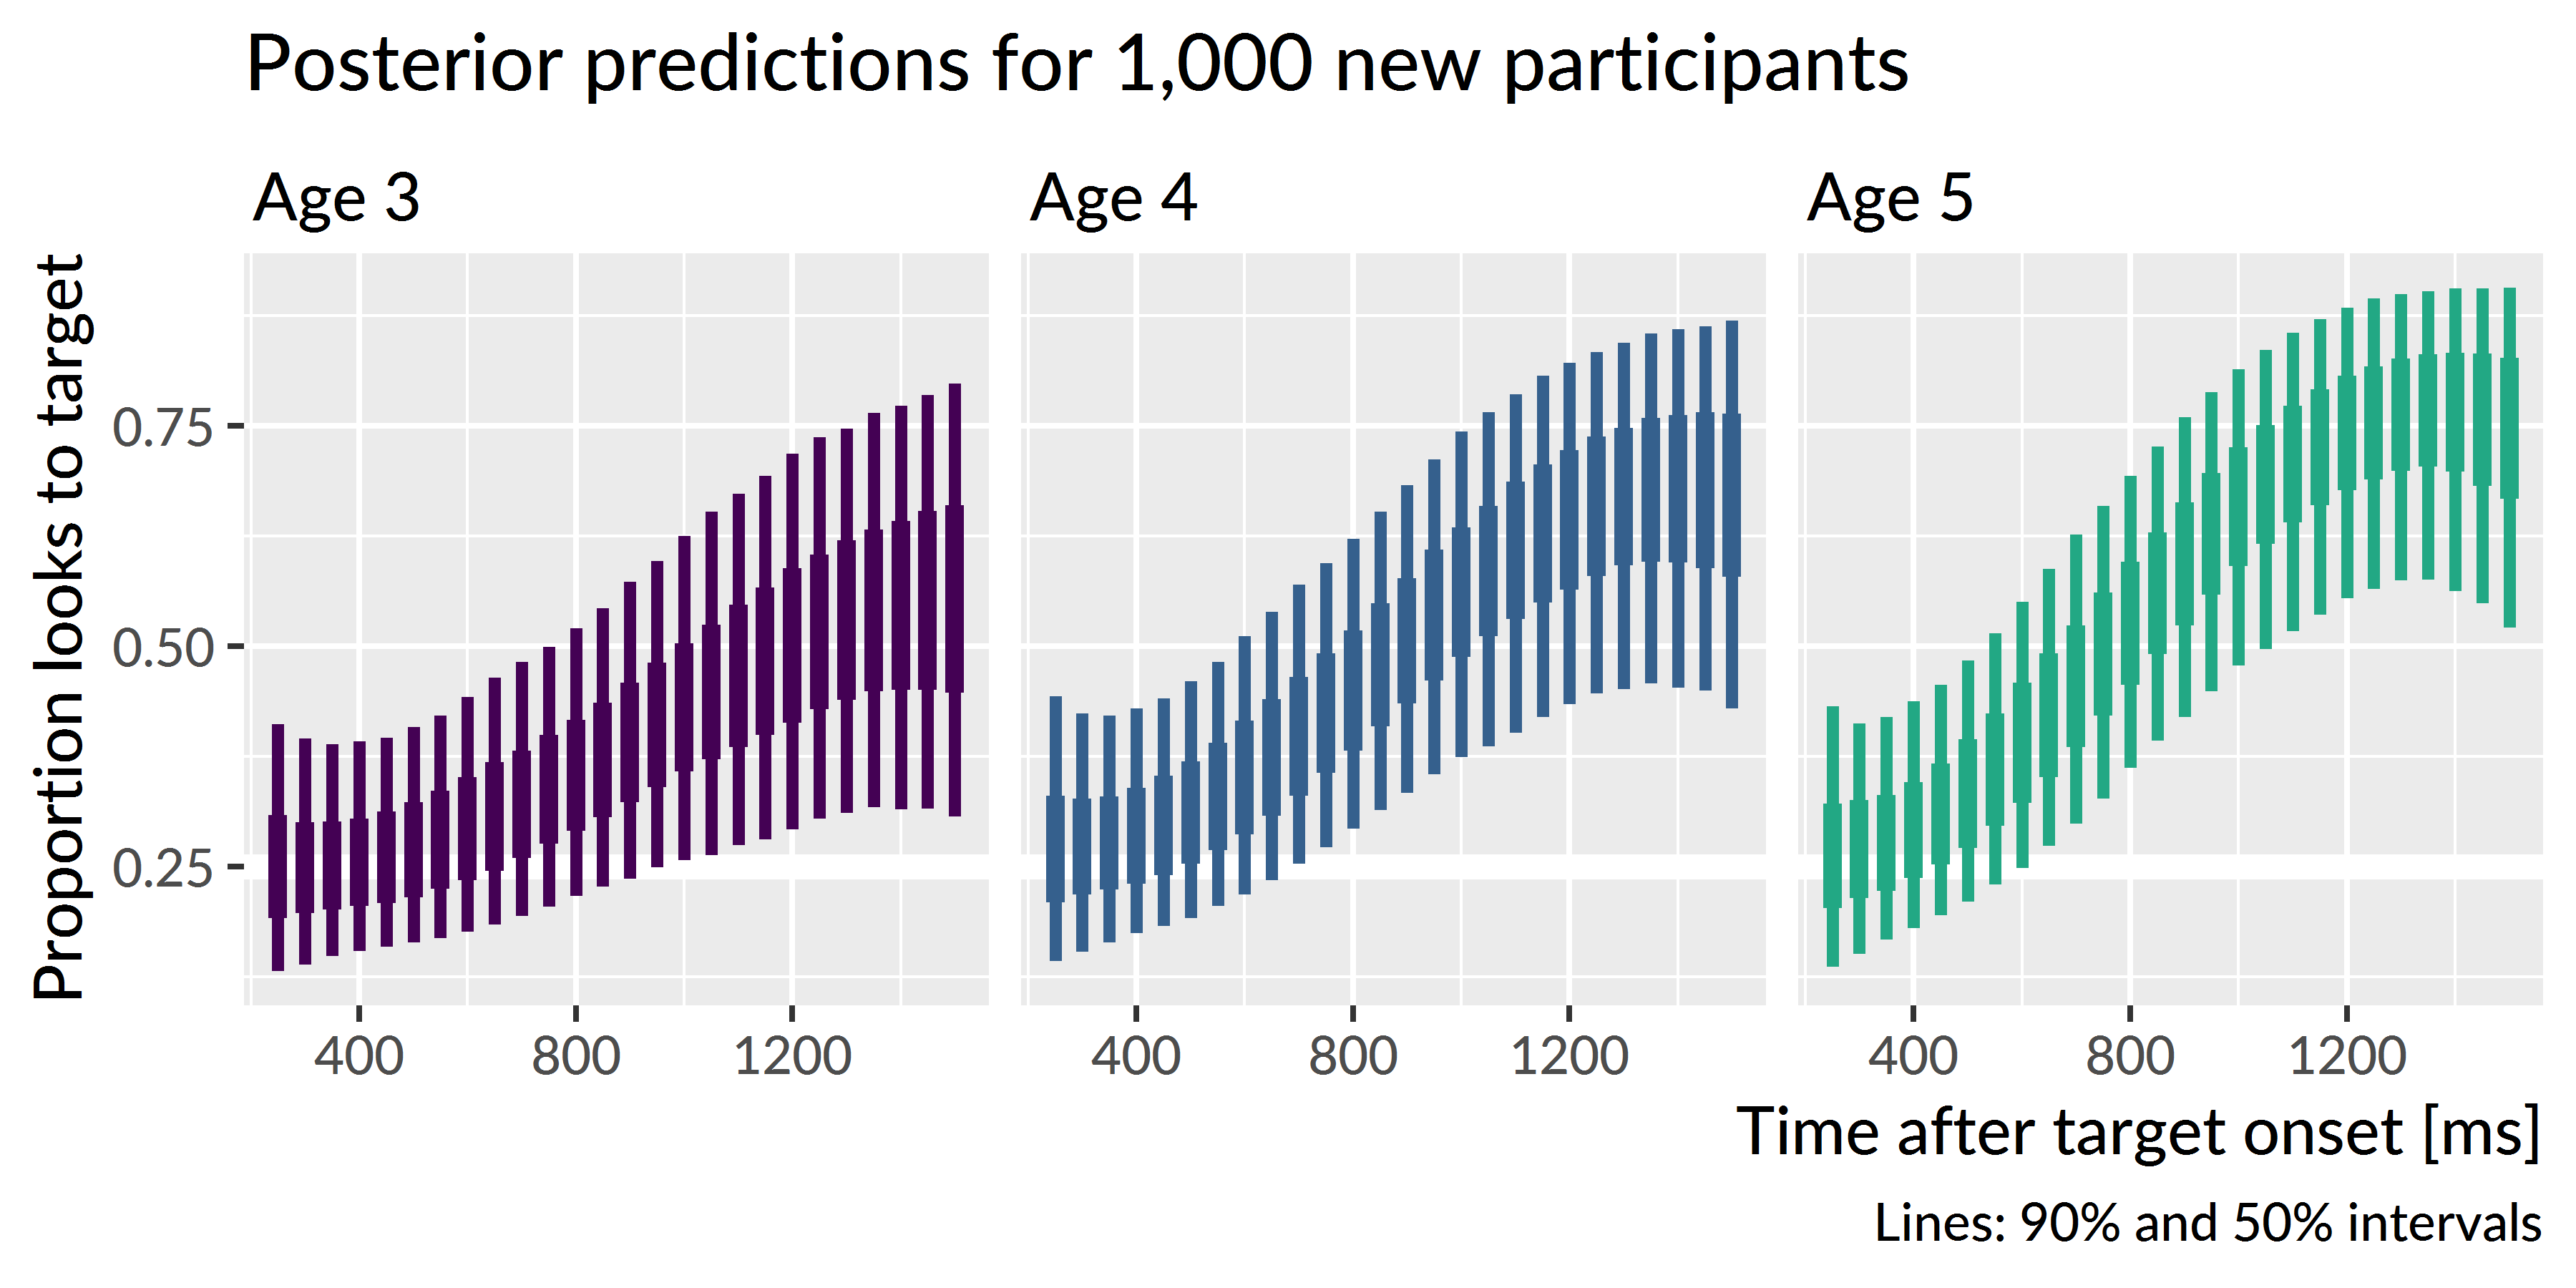 Uncertainty intervals for the simulated participants. Variability is widest at age 3 and narrowest at age 5, consistent with the prediction that children become less variable as they grow older.